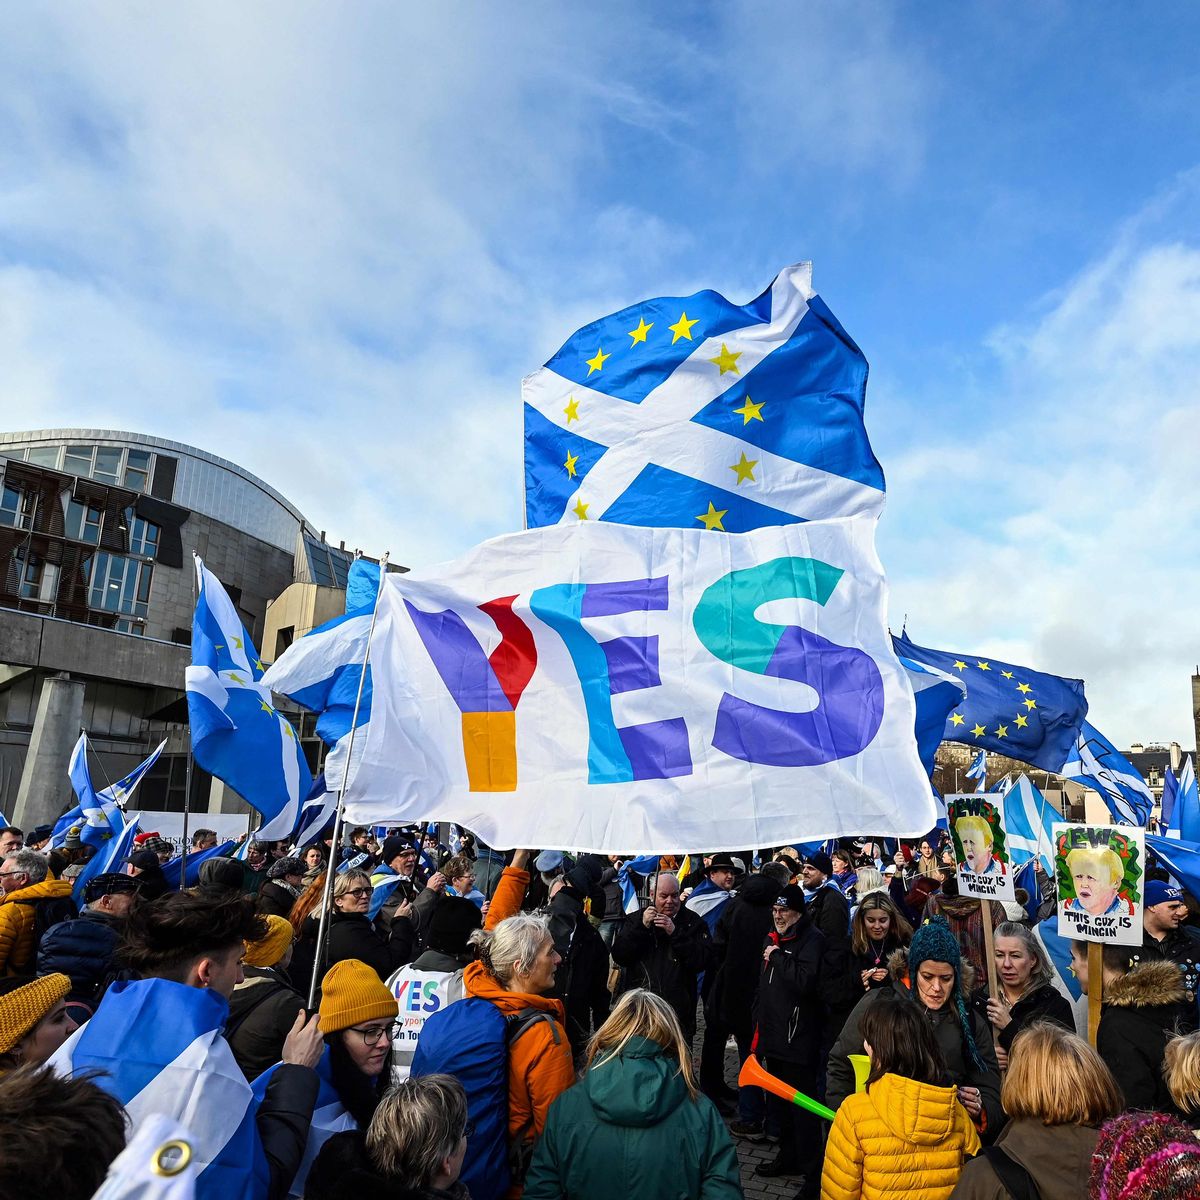 do u know anything about scottish independence from the uk/why so many people want it?